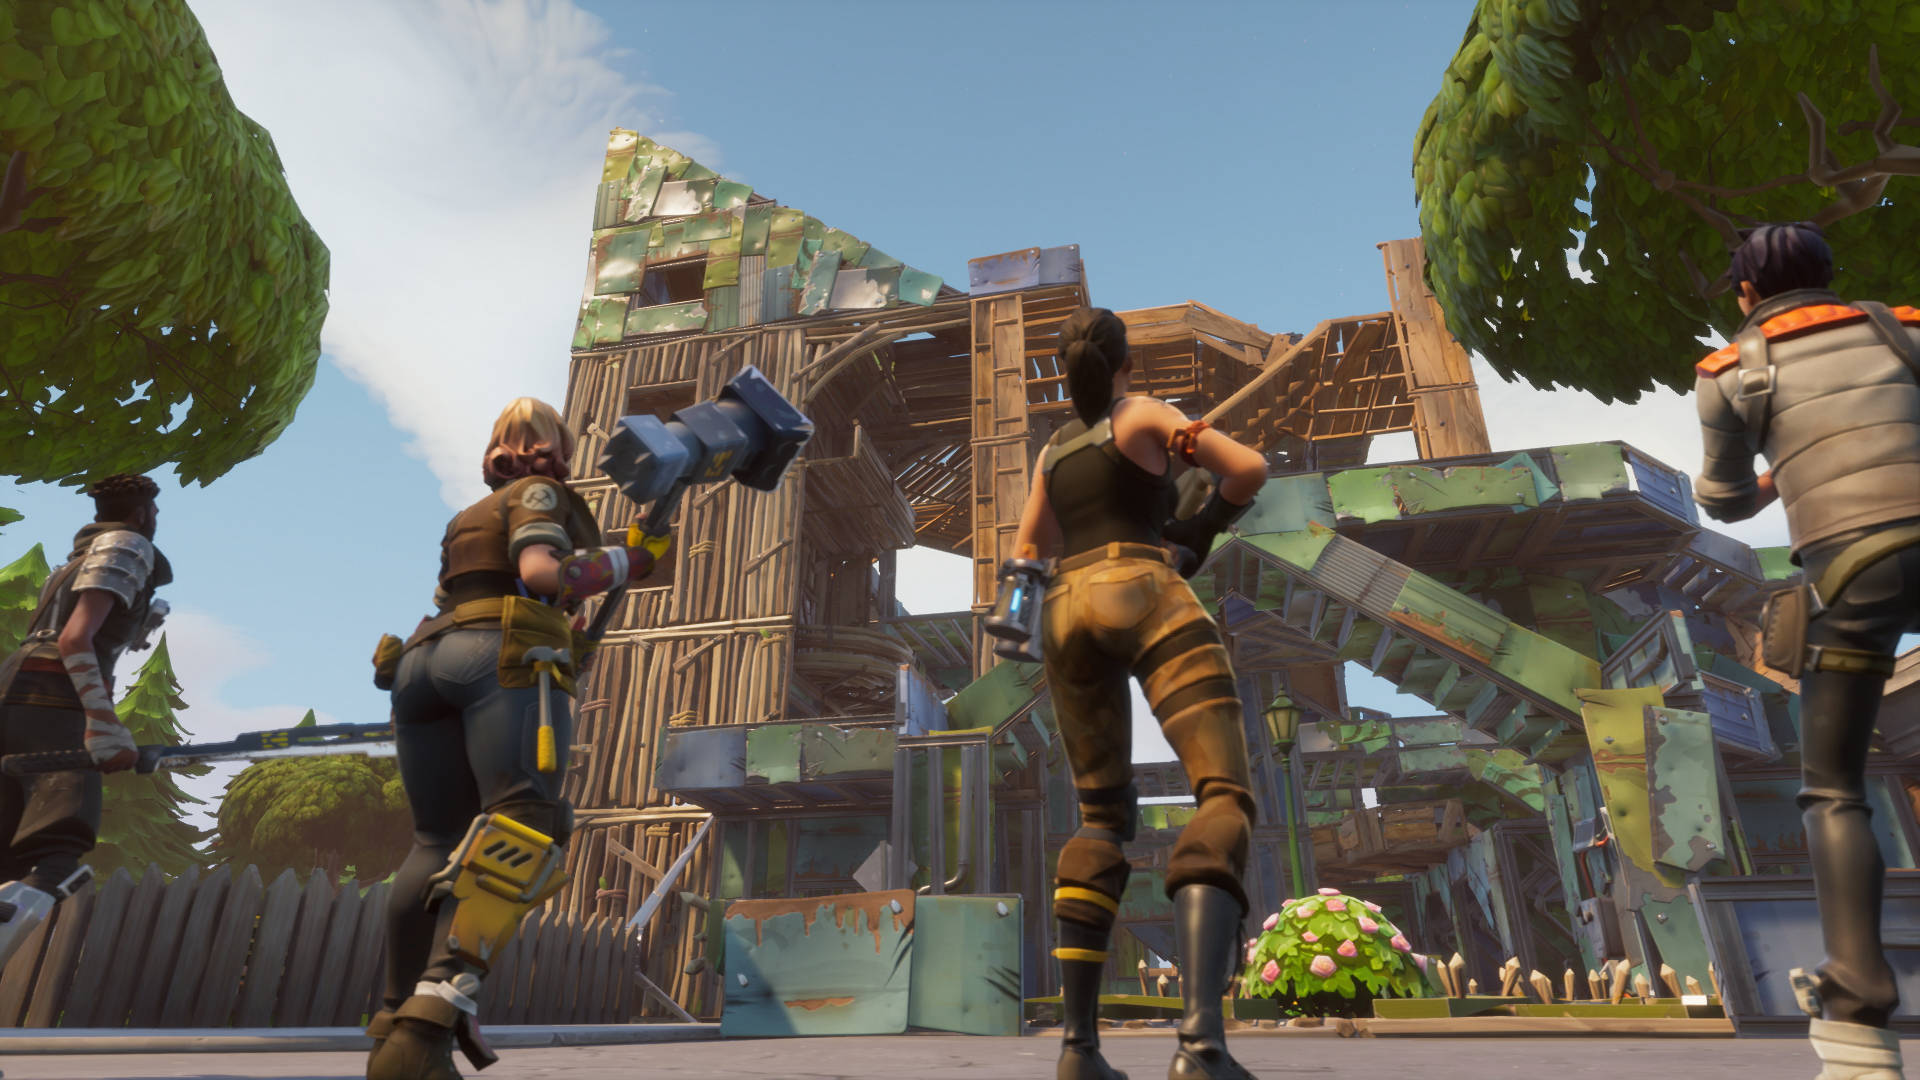 imspeedygonzales has created a practice course for building and editing in fortnite - fortnite training course creative code